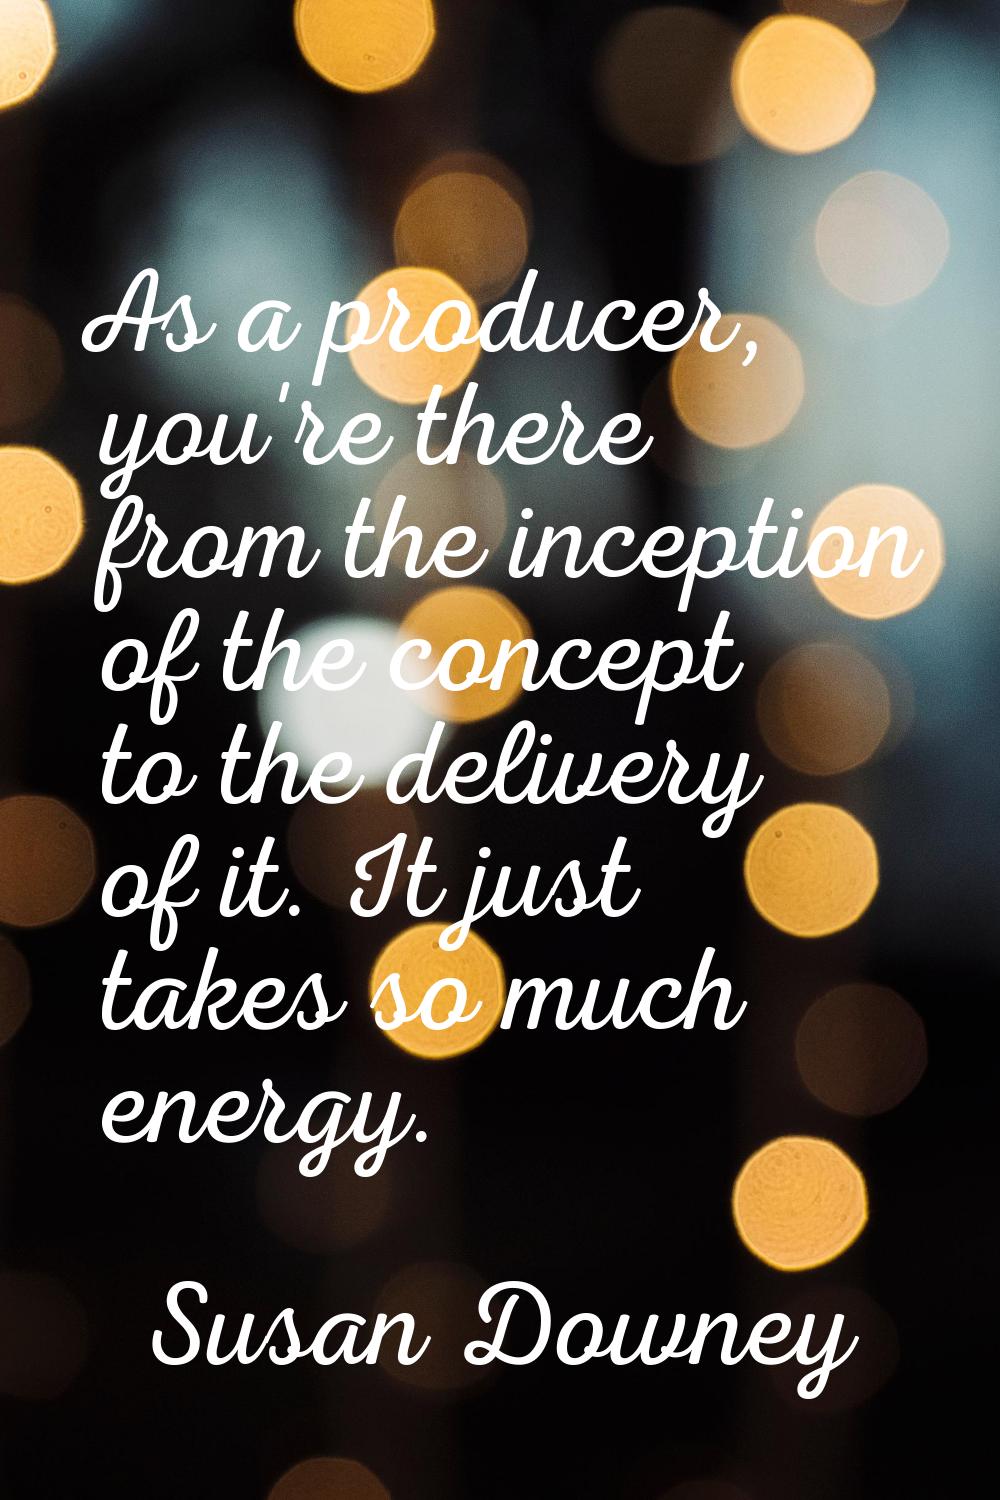 As a producer, you're there from the inception of the concept to the delivery of it. It just takes 